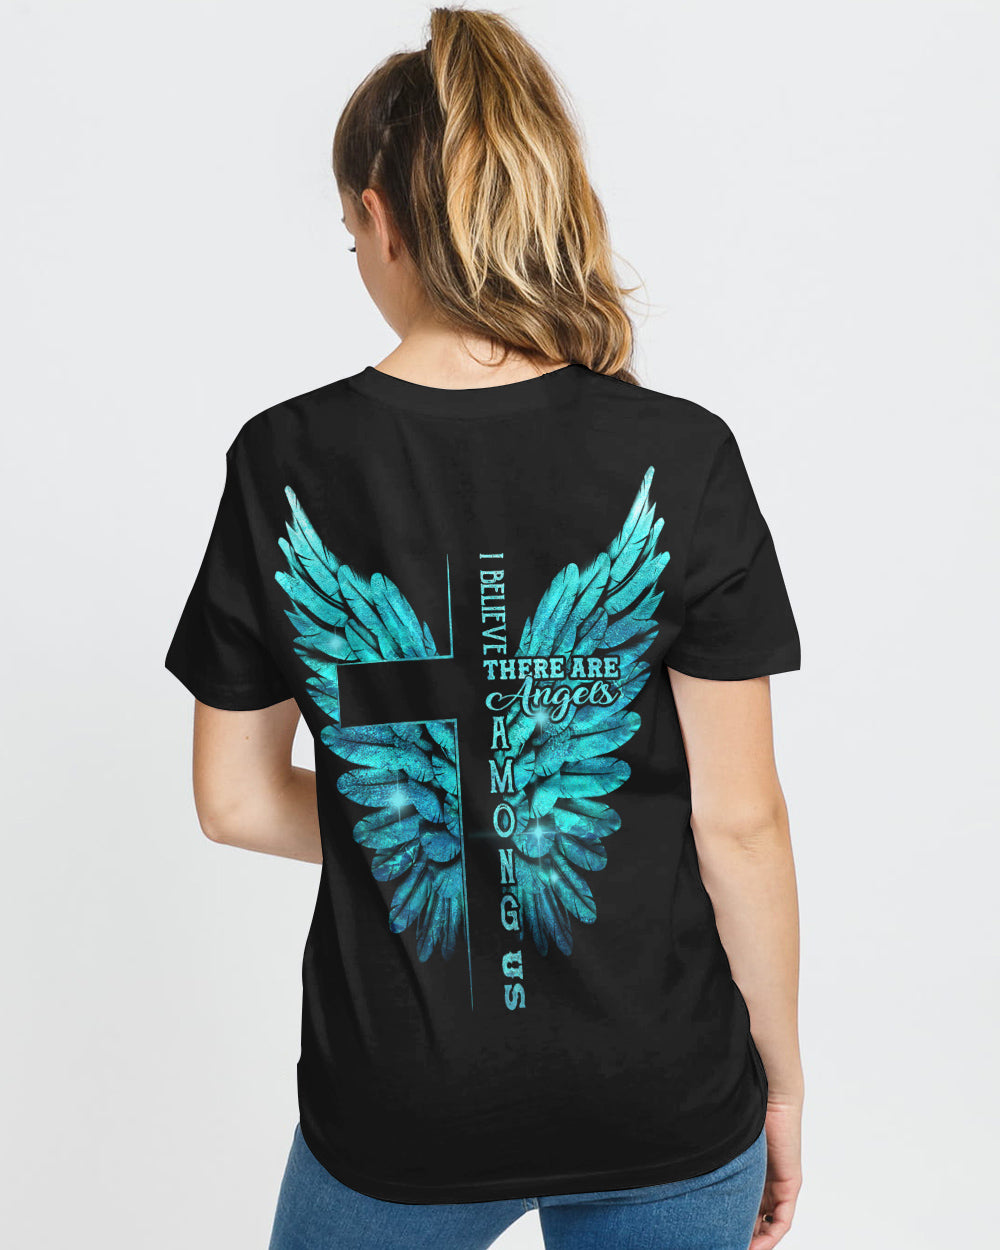 I Believe There Are Angles Among Us Wings Women's Christian Tshirt